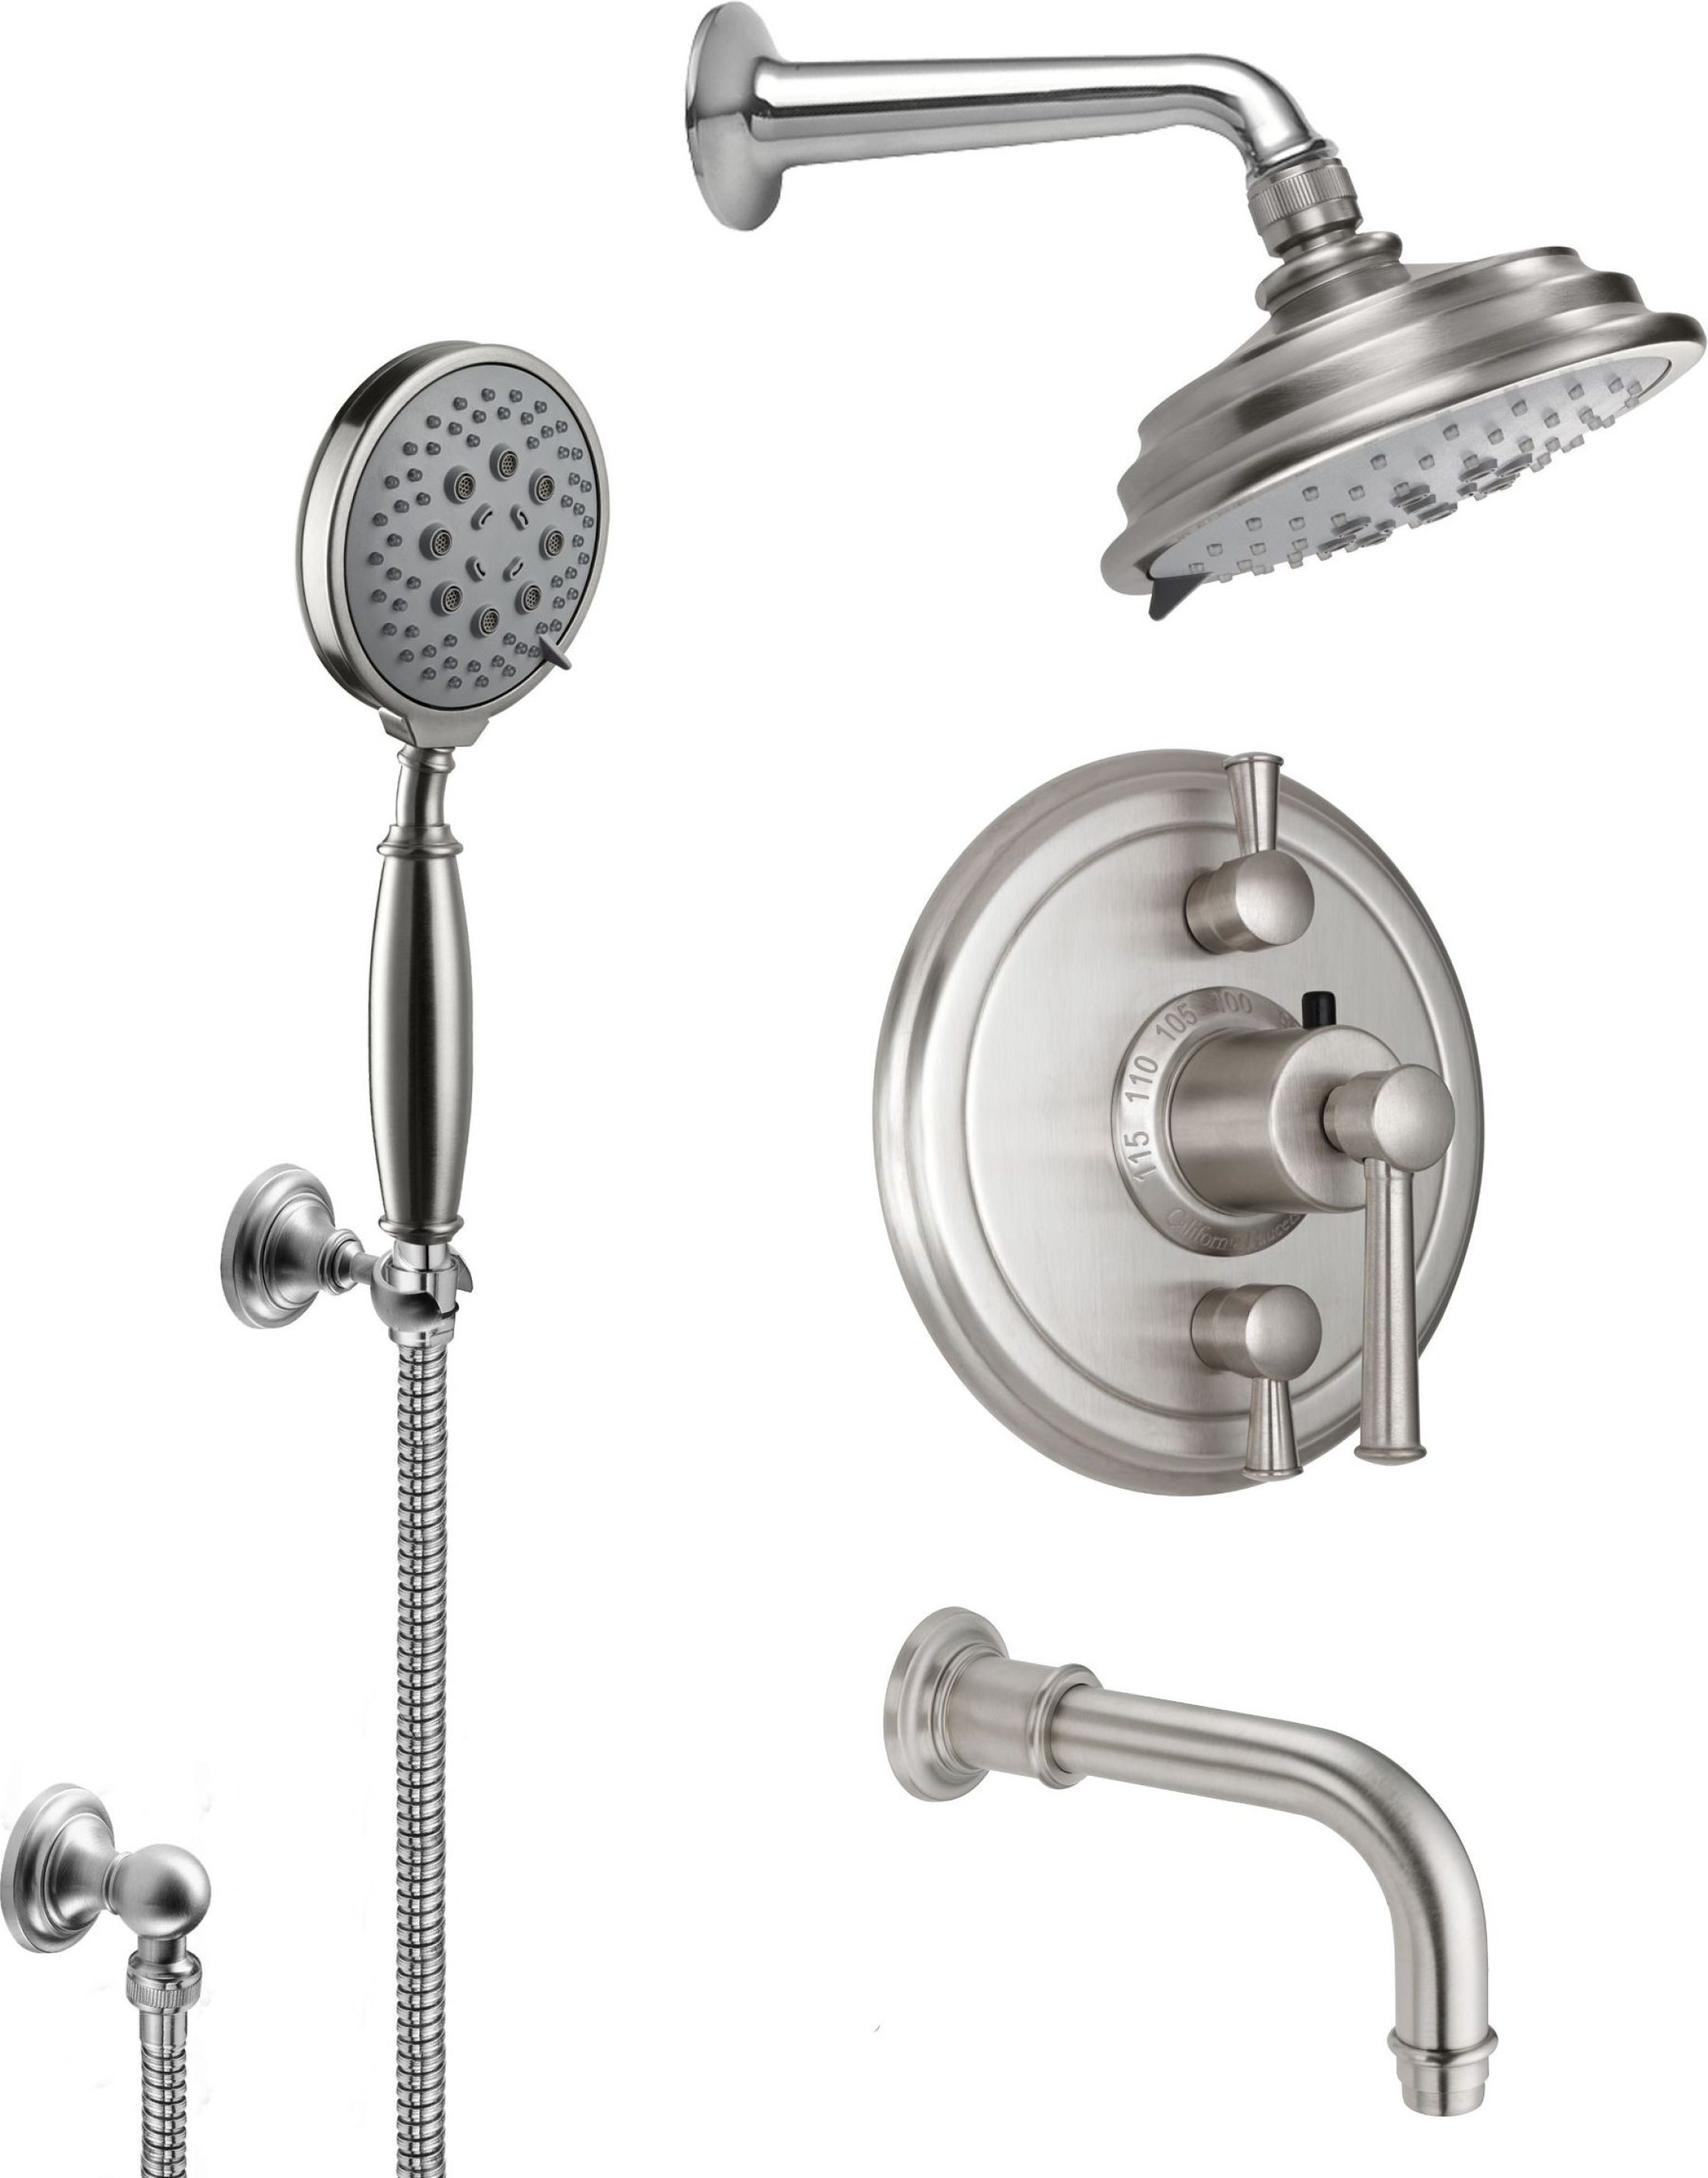 Basket Shower Suction Clear 41600, 1 - Fred Meyer